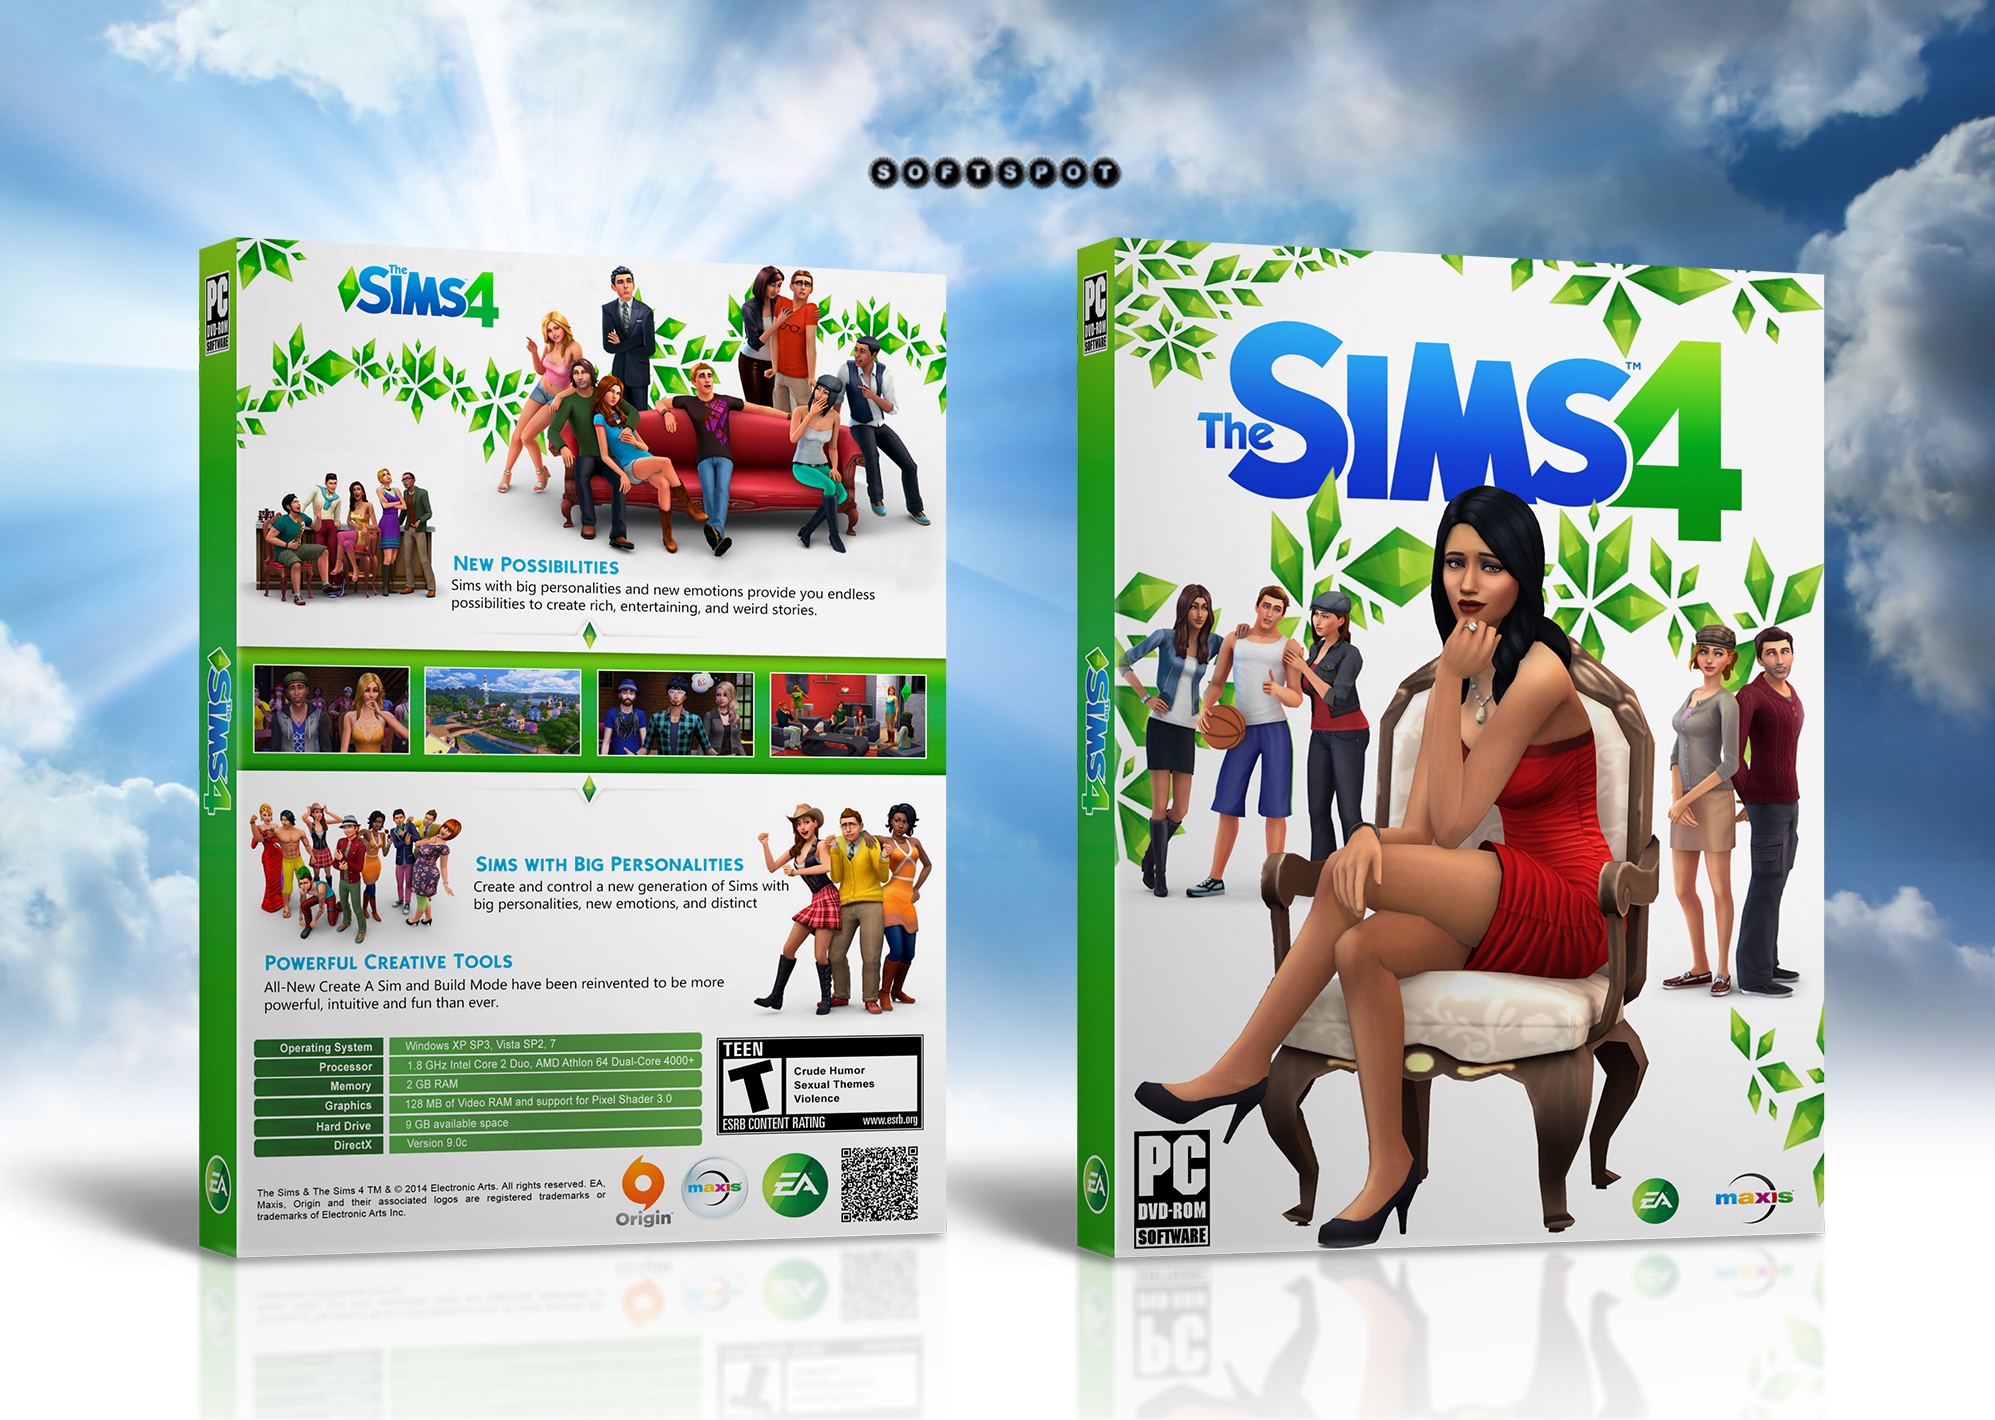 The sims 4: Digital deluxe edition box cover